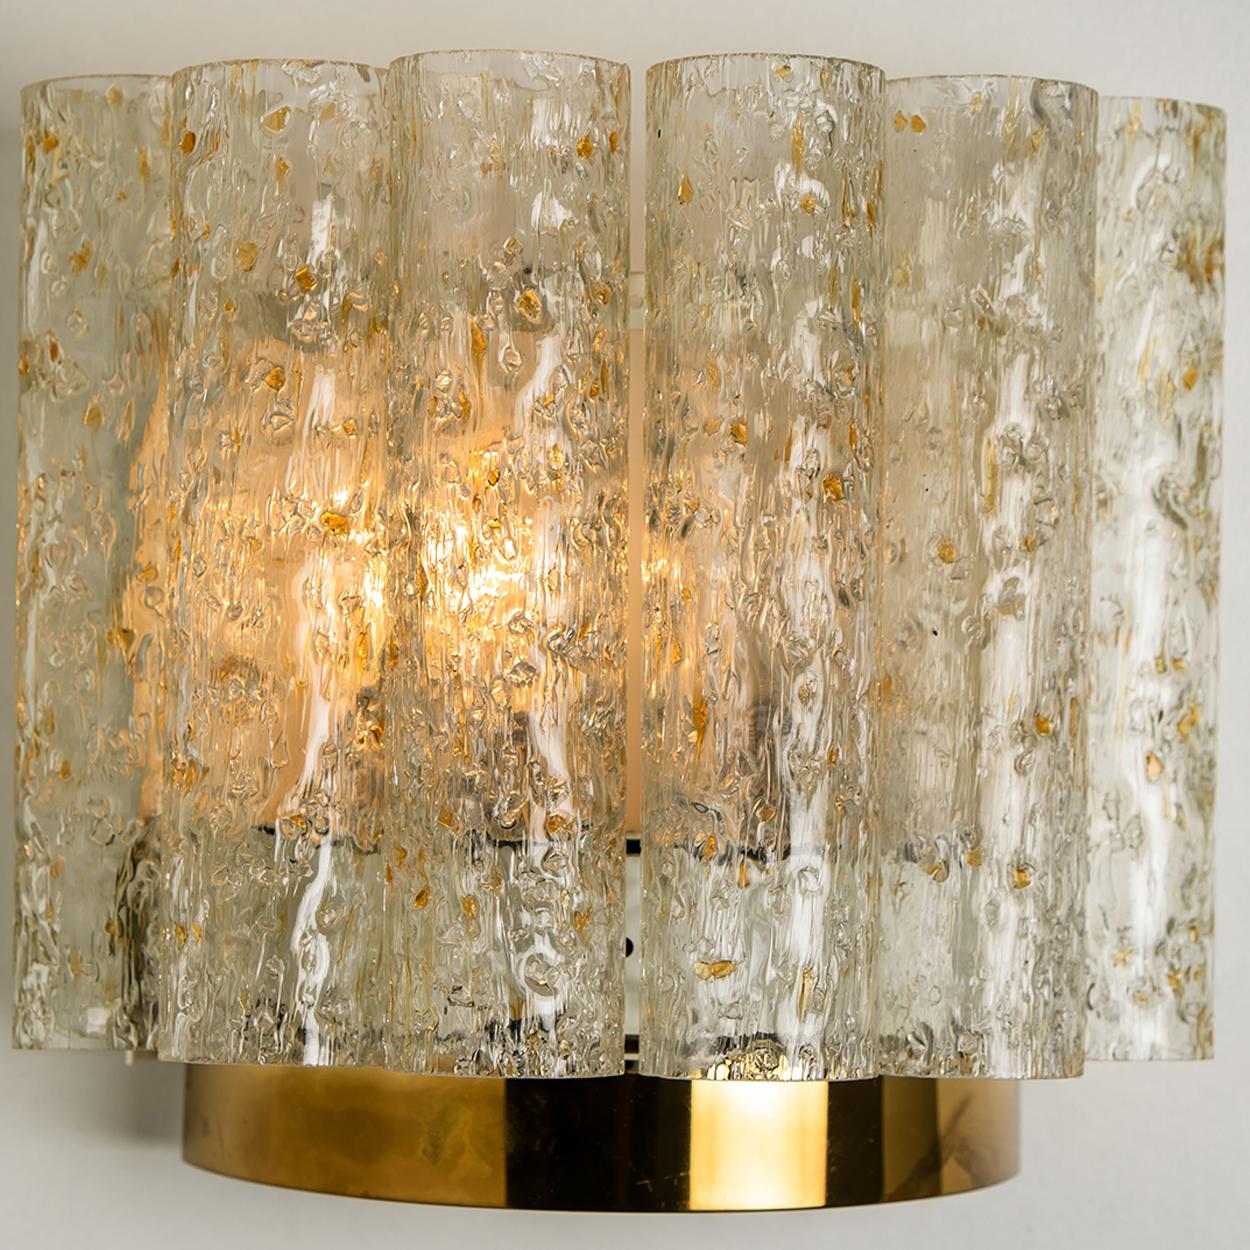 Late 20th Century Pair of Doria Wall Lamps in Brass and Glass, 1960s For Sale